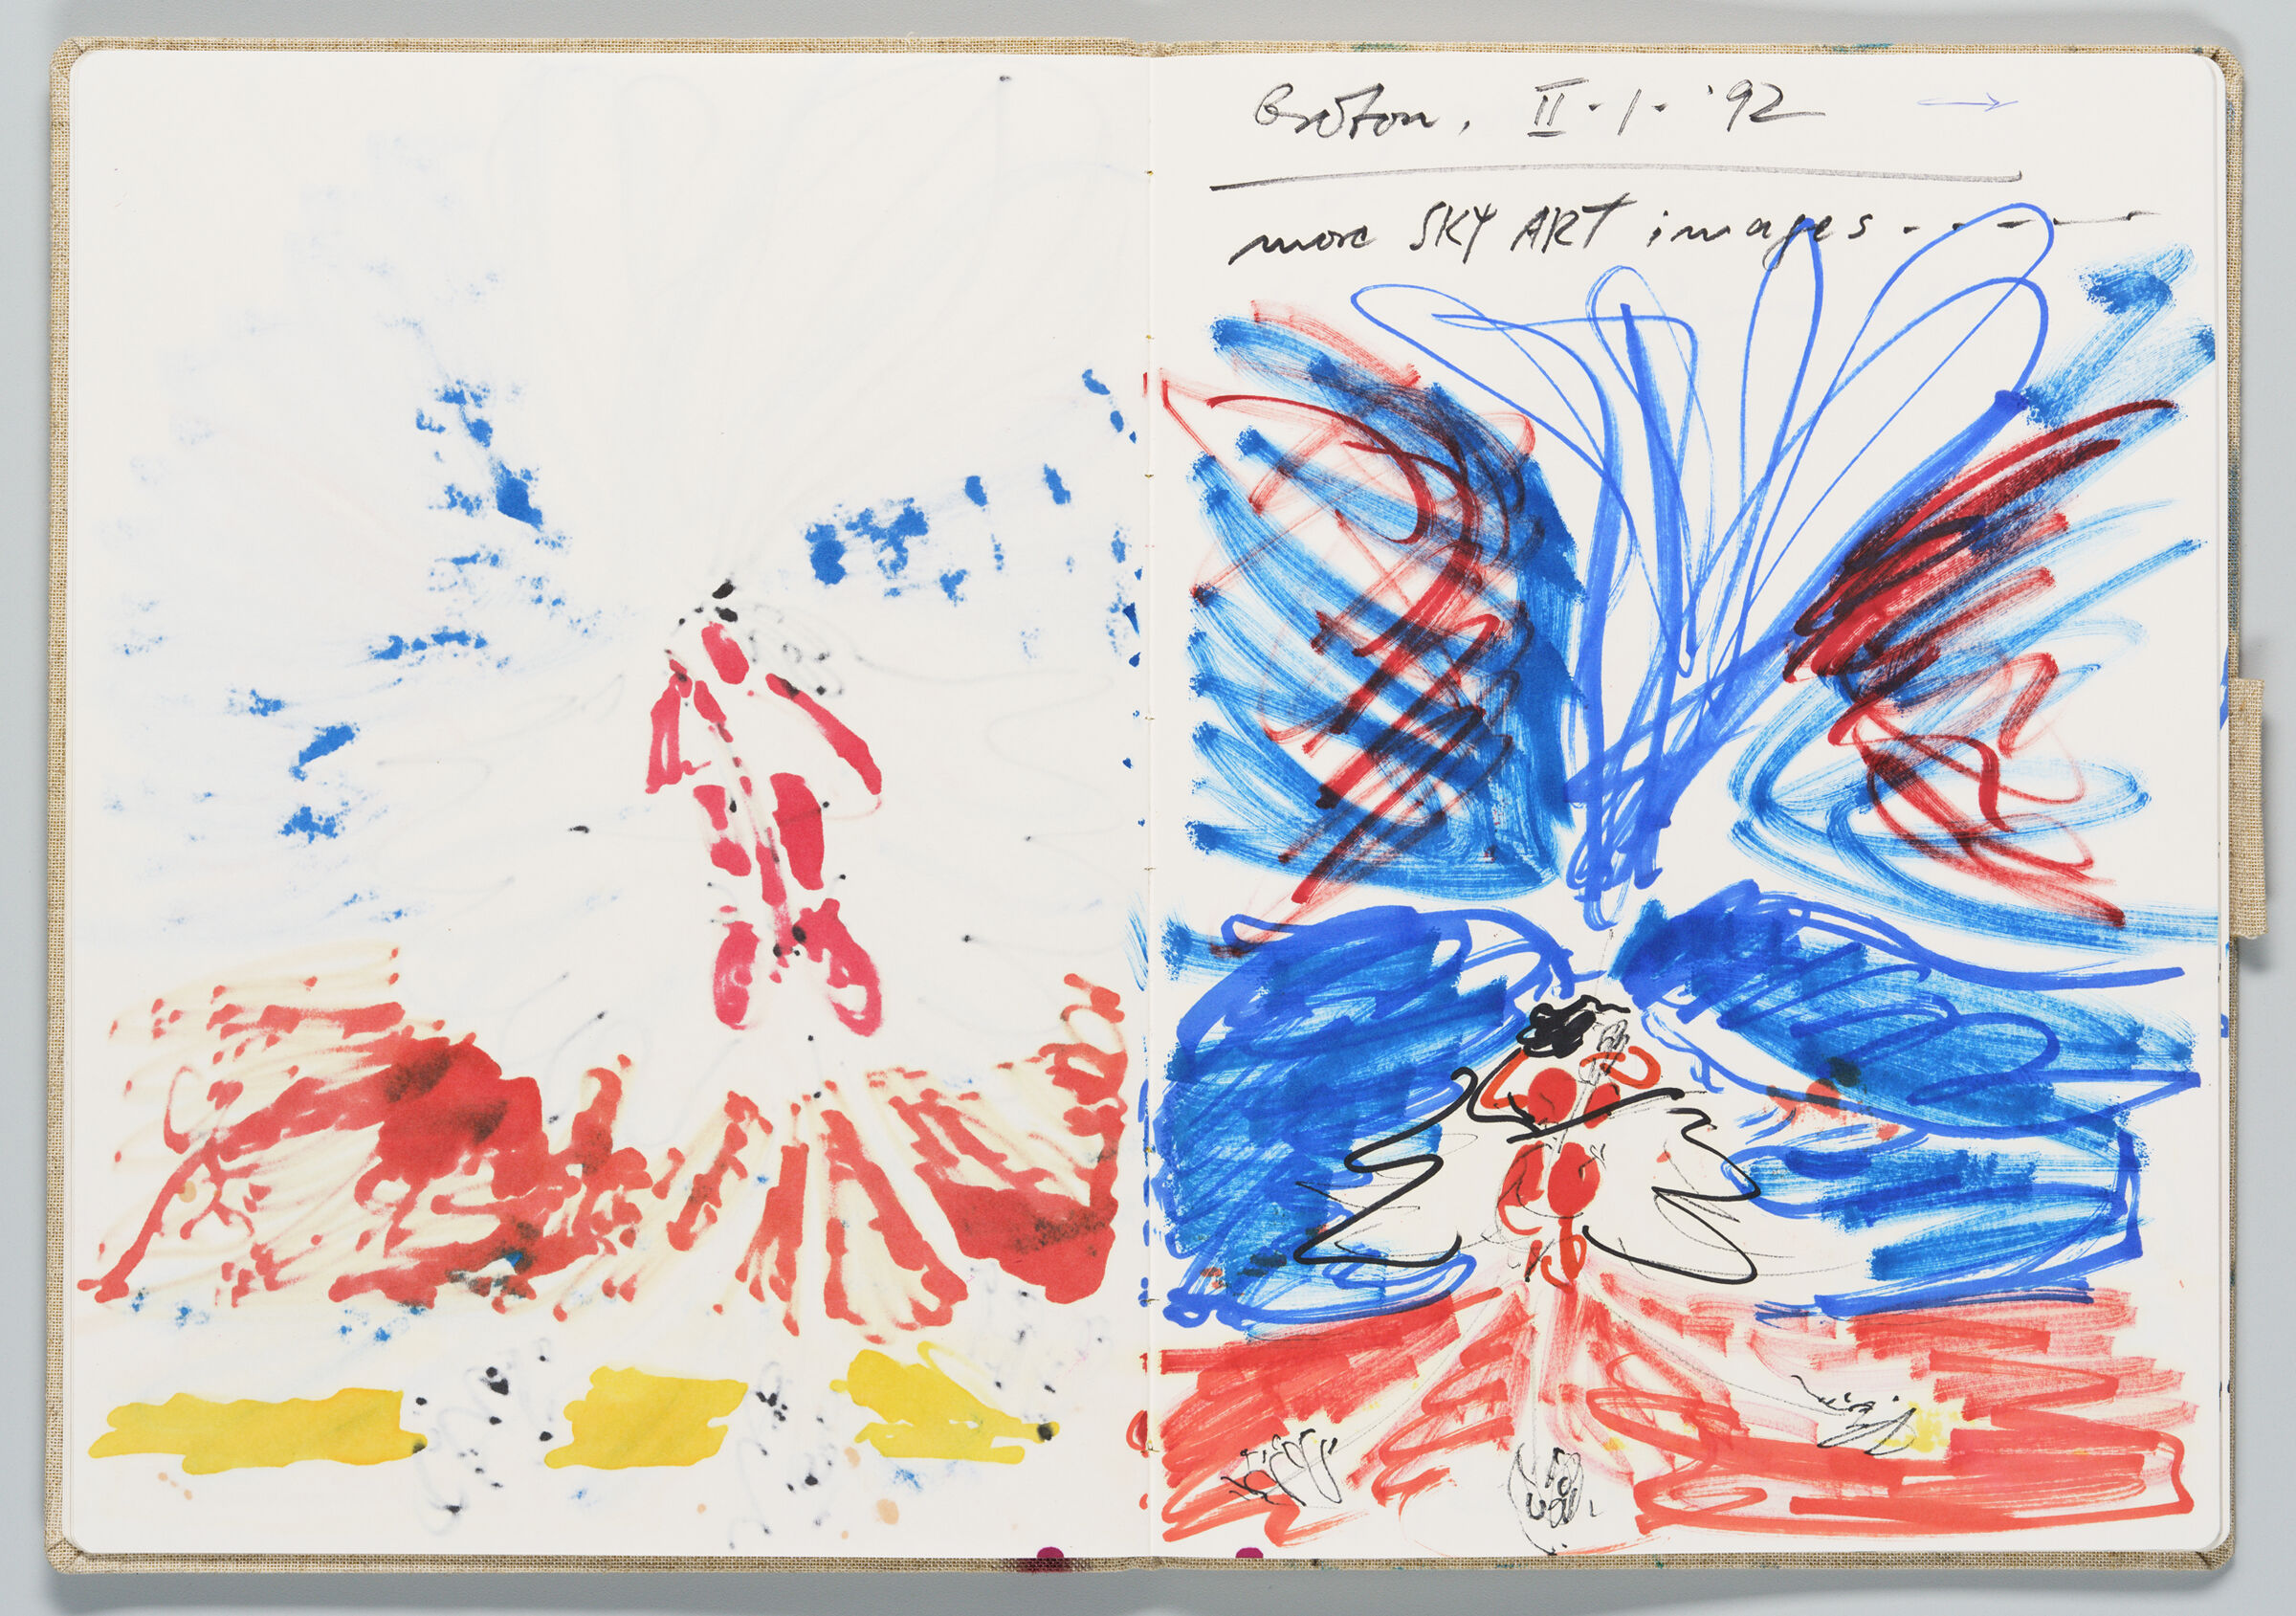 Untitled (Bleed-Through Of Previous Page With Marker Stain, Left Page); Untitled (